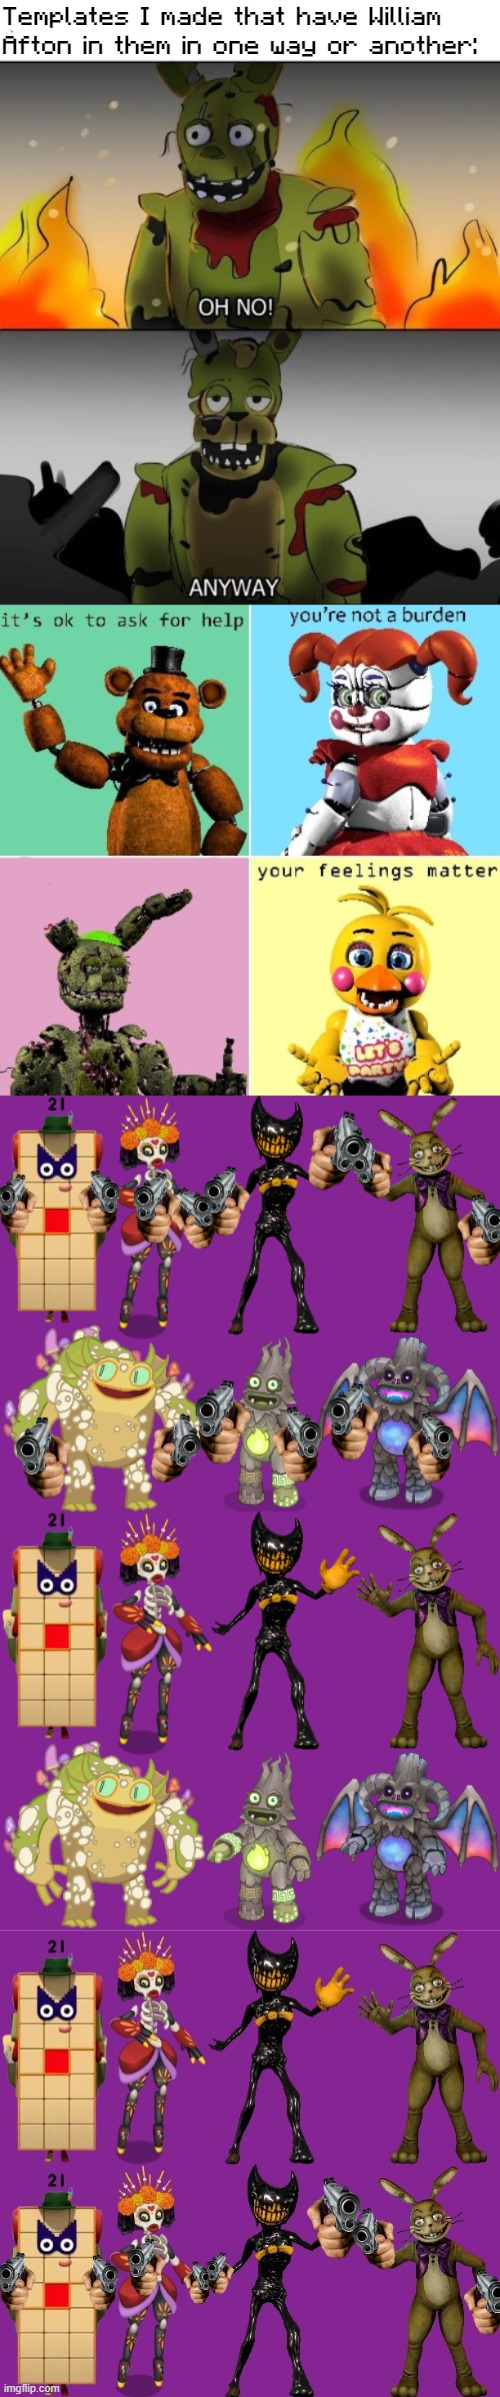 Templates I made that have William Afton in them in one way or another: | image tagged in oh no anyway but fnaf,clever fnaf title,the squad and the honorary members but with pew-pews,the squad | made w/ Imgflip meme maker